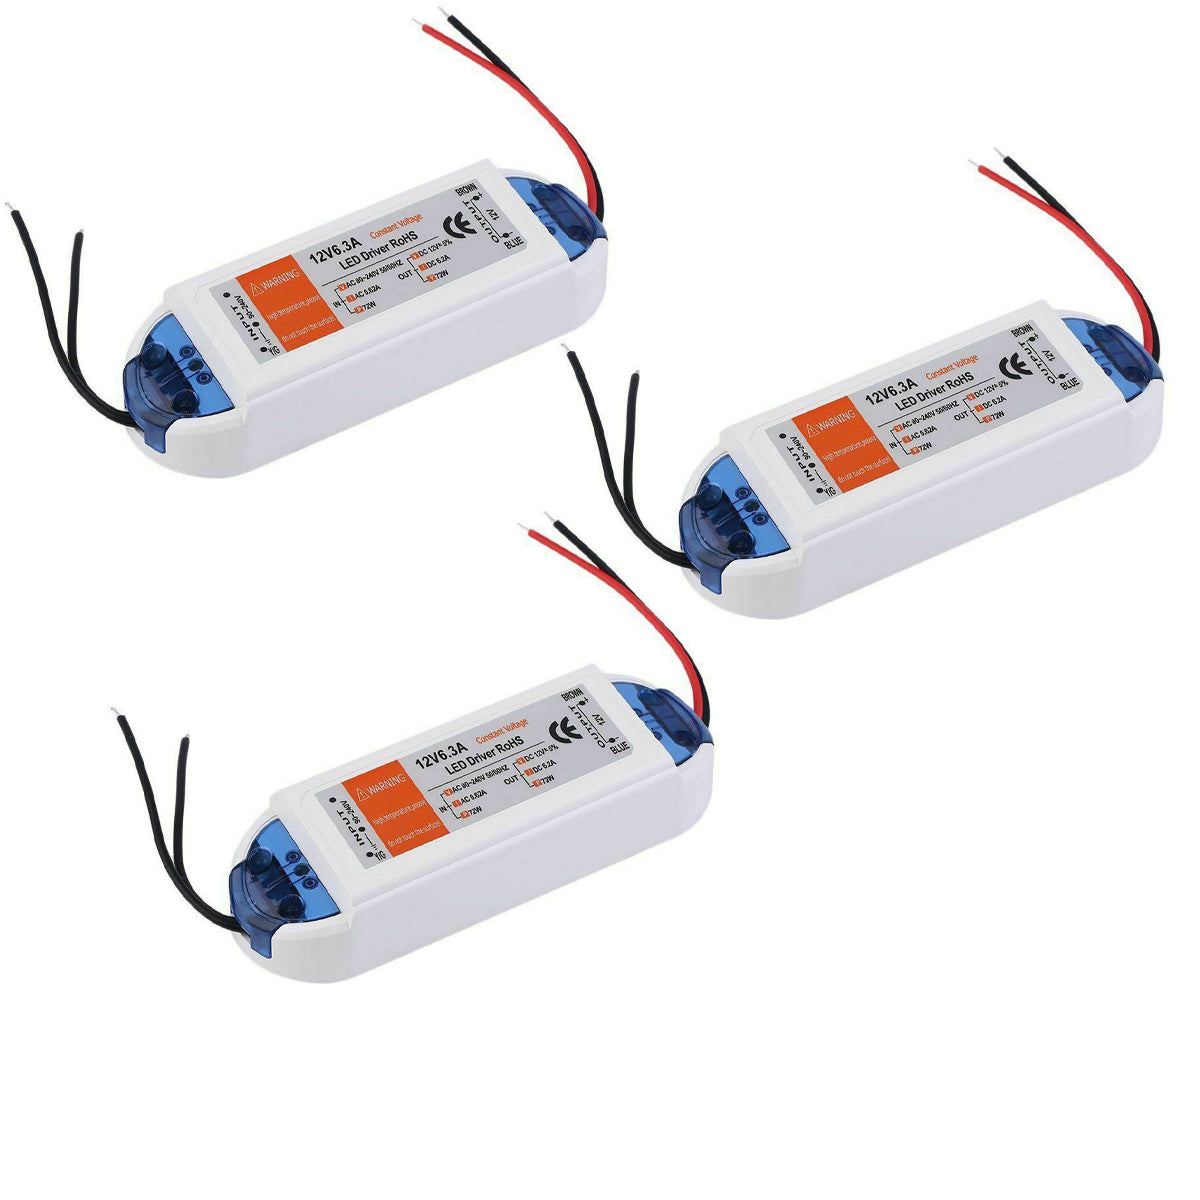 6.2A 72W Constant Voltage LED Driver DC 12V Power Supply~1003